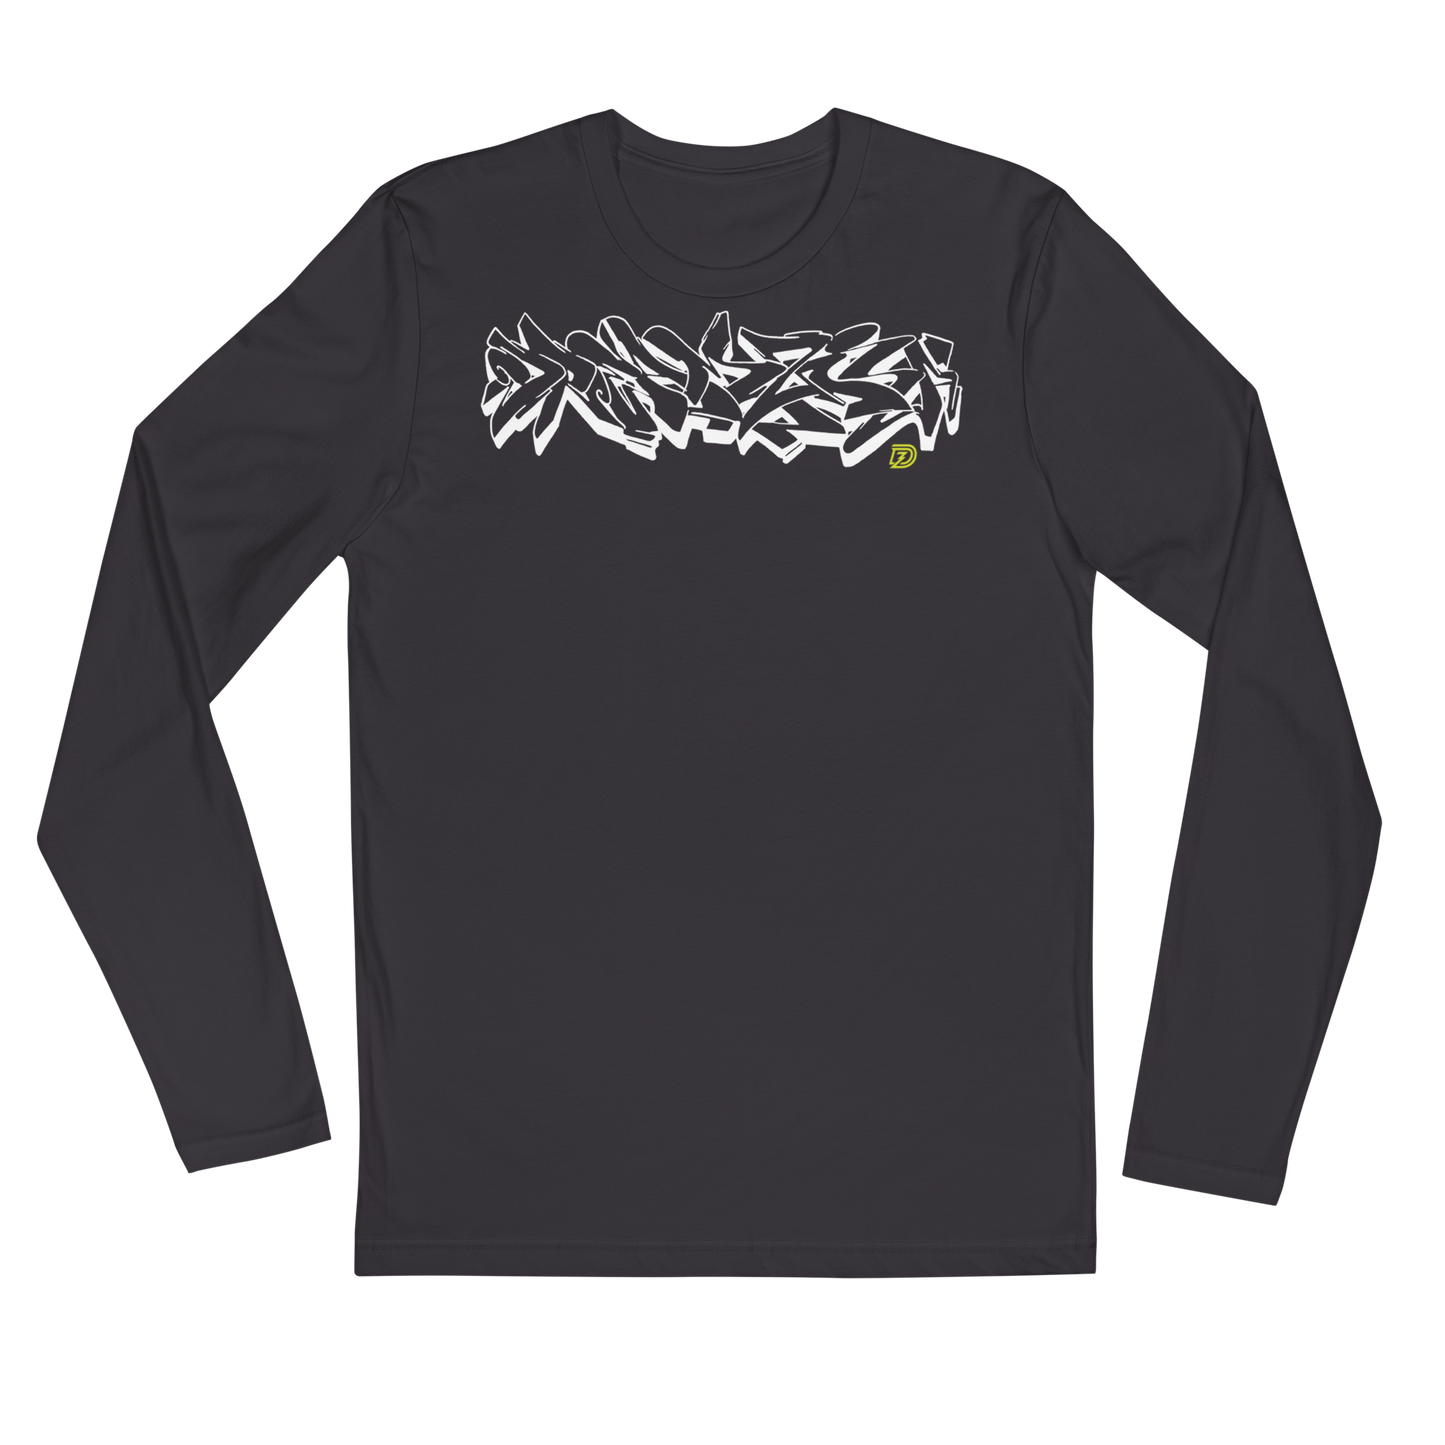 Graffiti Wildstyle 2 by Sanitor Long Sleeve Fitted Crew in Heavy Metal